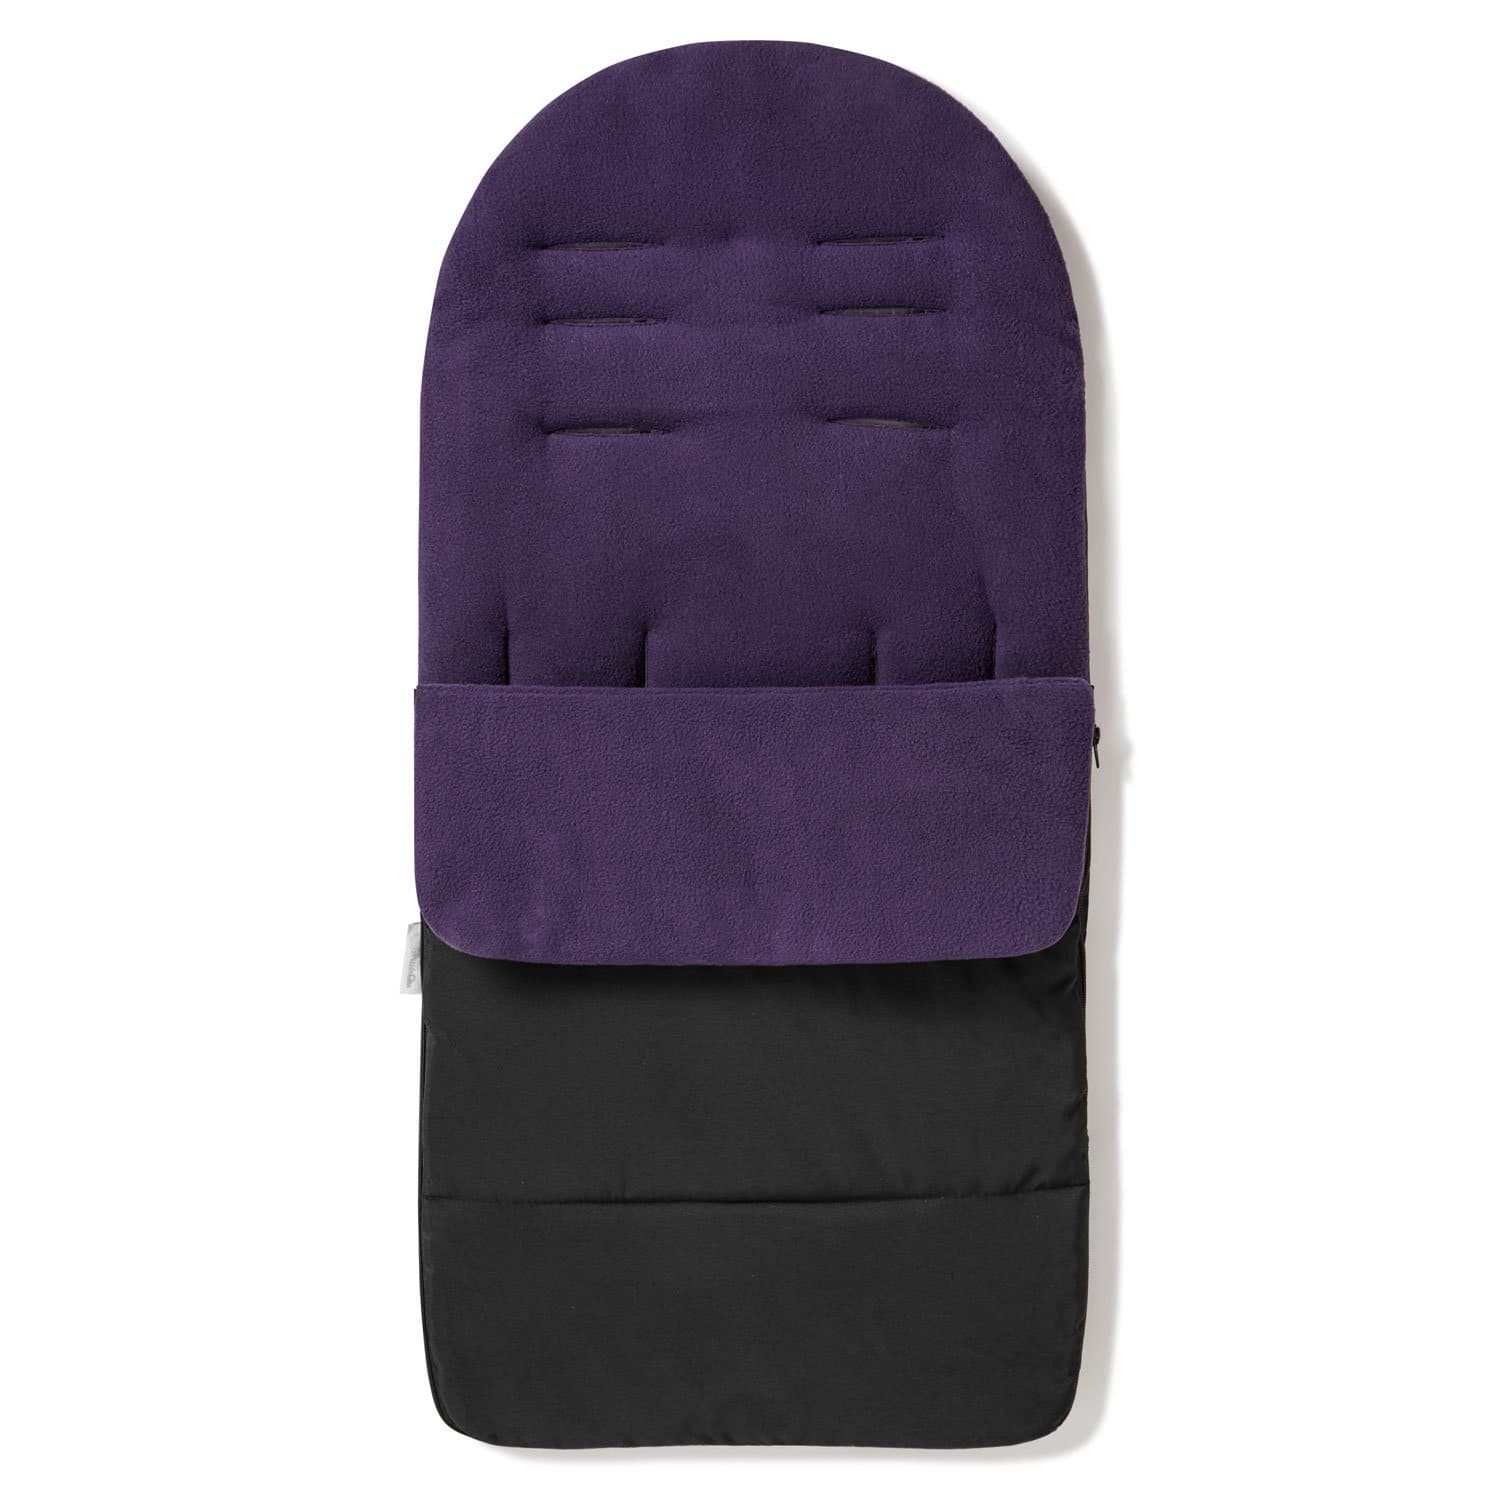 Premium Footmuff / Cosy Toes Compatible with Firstwheels - Plum Purple / Fits All Models | For Your Little One